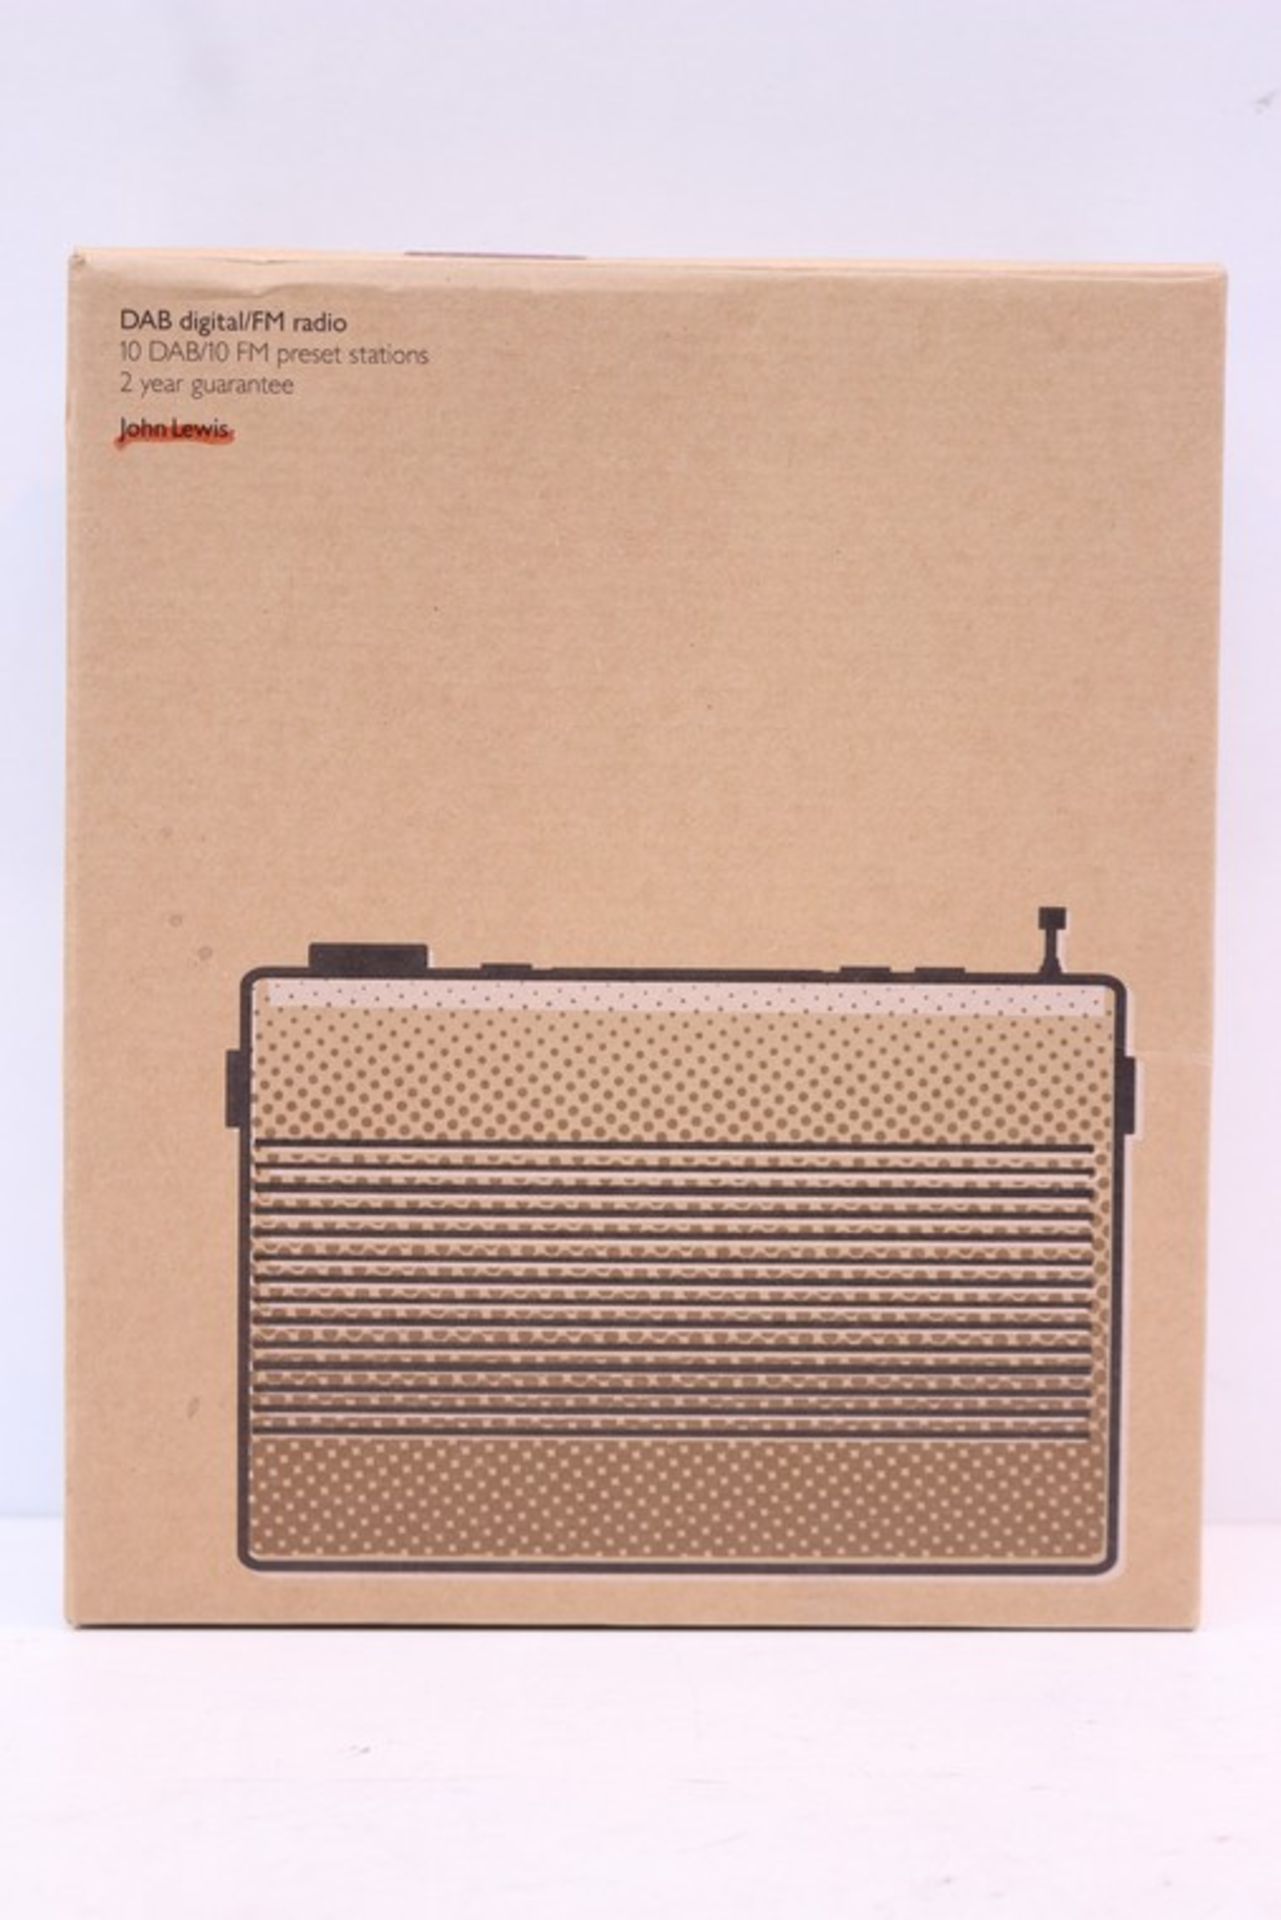 3 x BOXED DAB DIGITAL FM RADIOS COMBINED RRP £120 (22.5.17) *PLEASE NOTE THAT THE BID PRICE IS